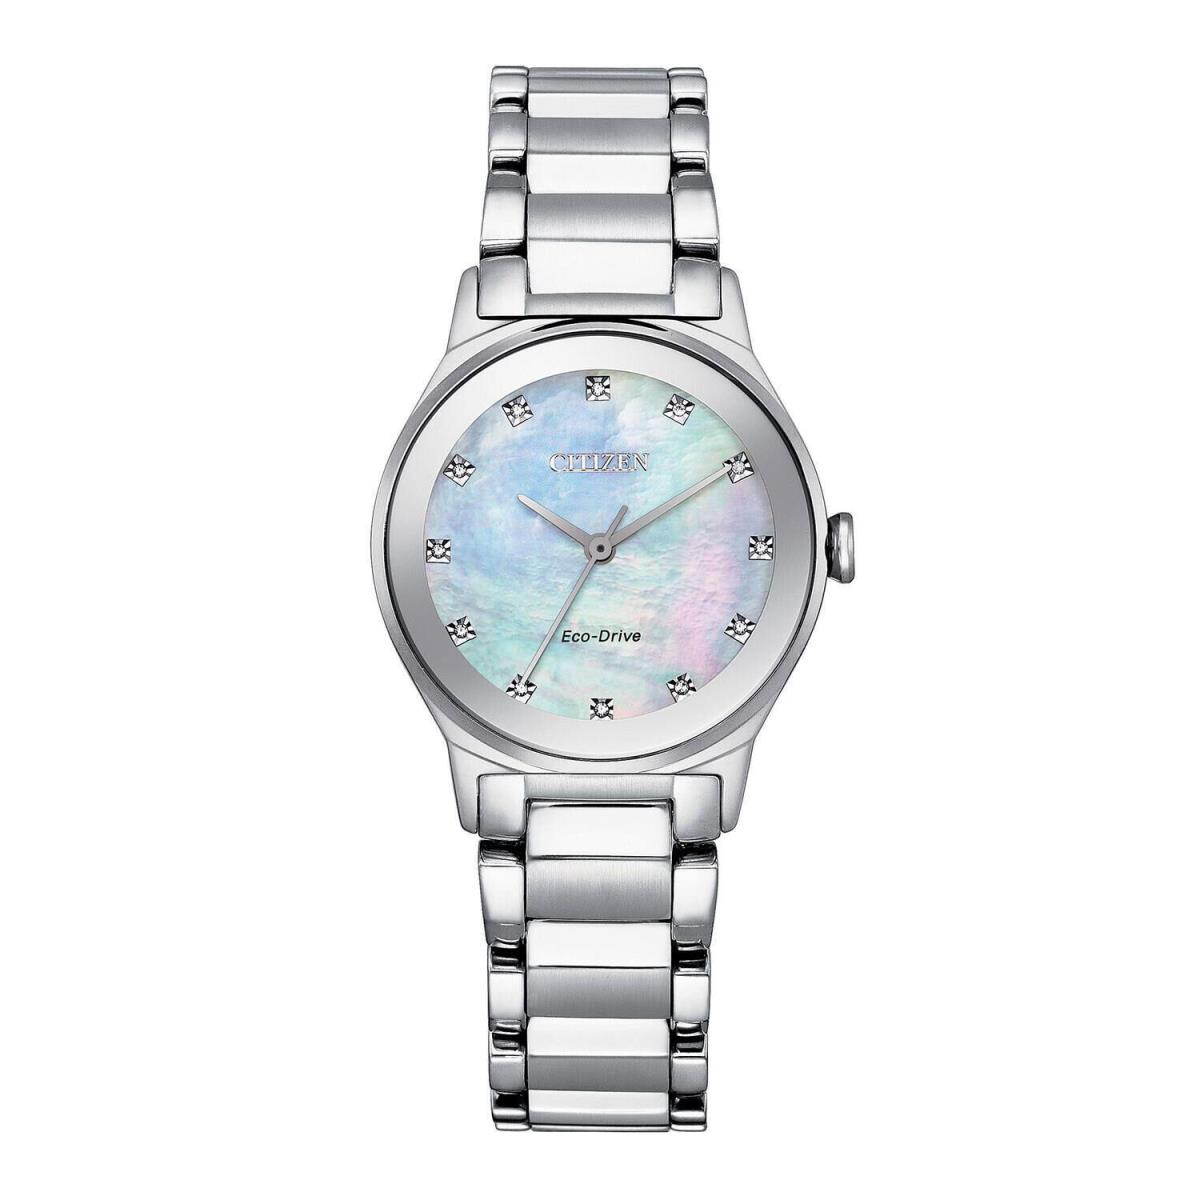 Citizen Women Eco-drive Watch with Axiom Stainless Steel Band White Pearl Dial - Dial: Blue, Band: Silver, Bezel: Silver